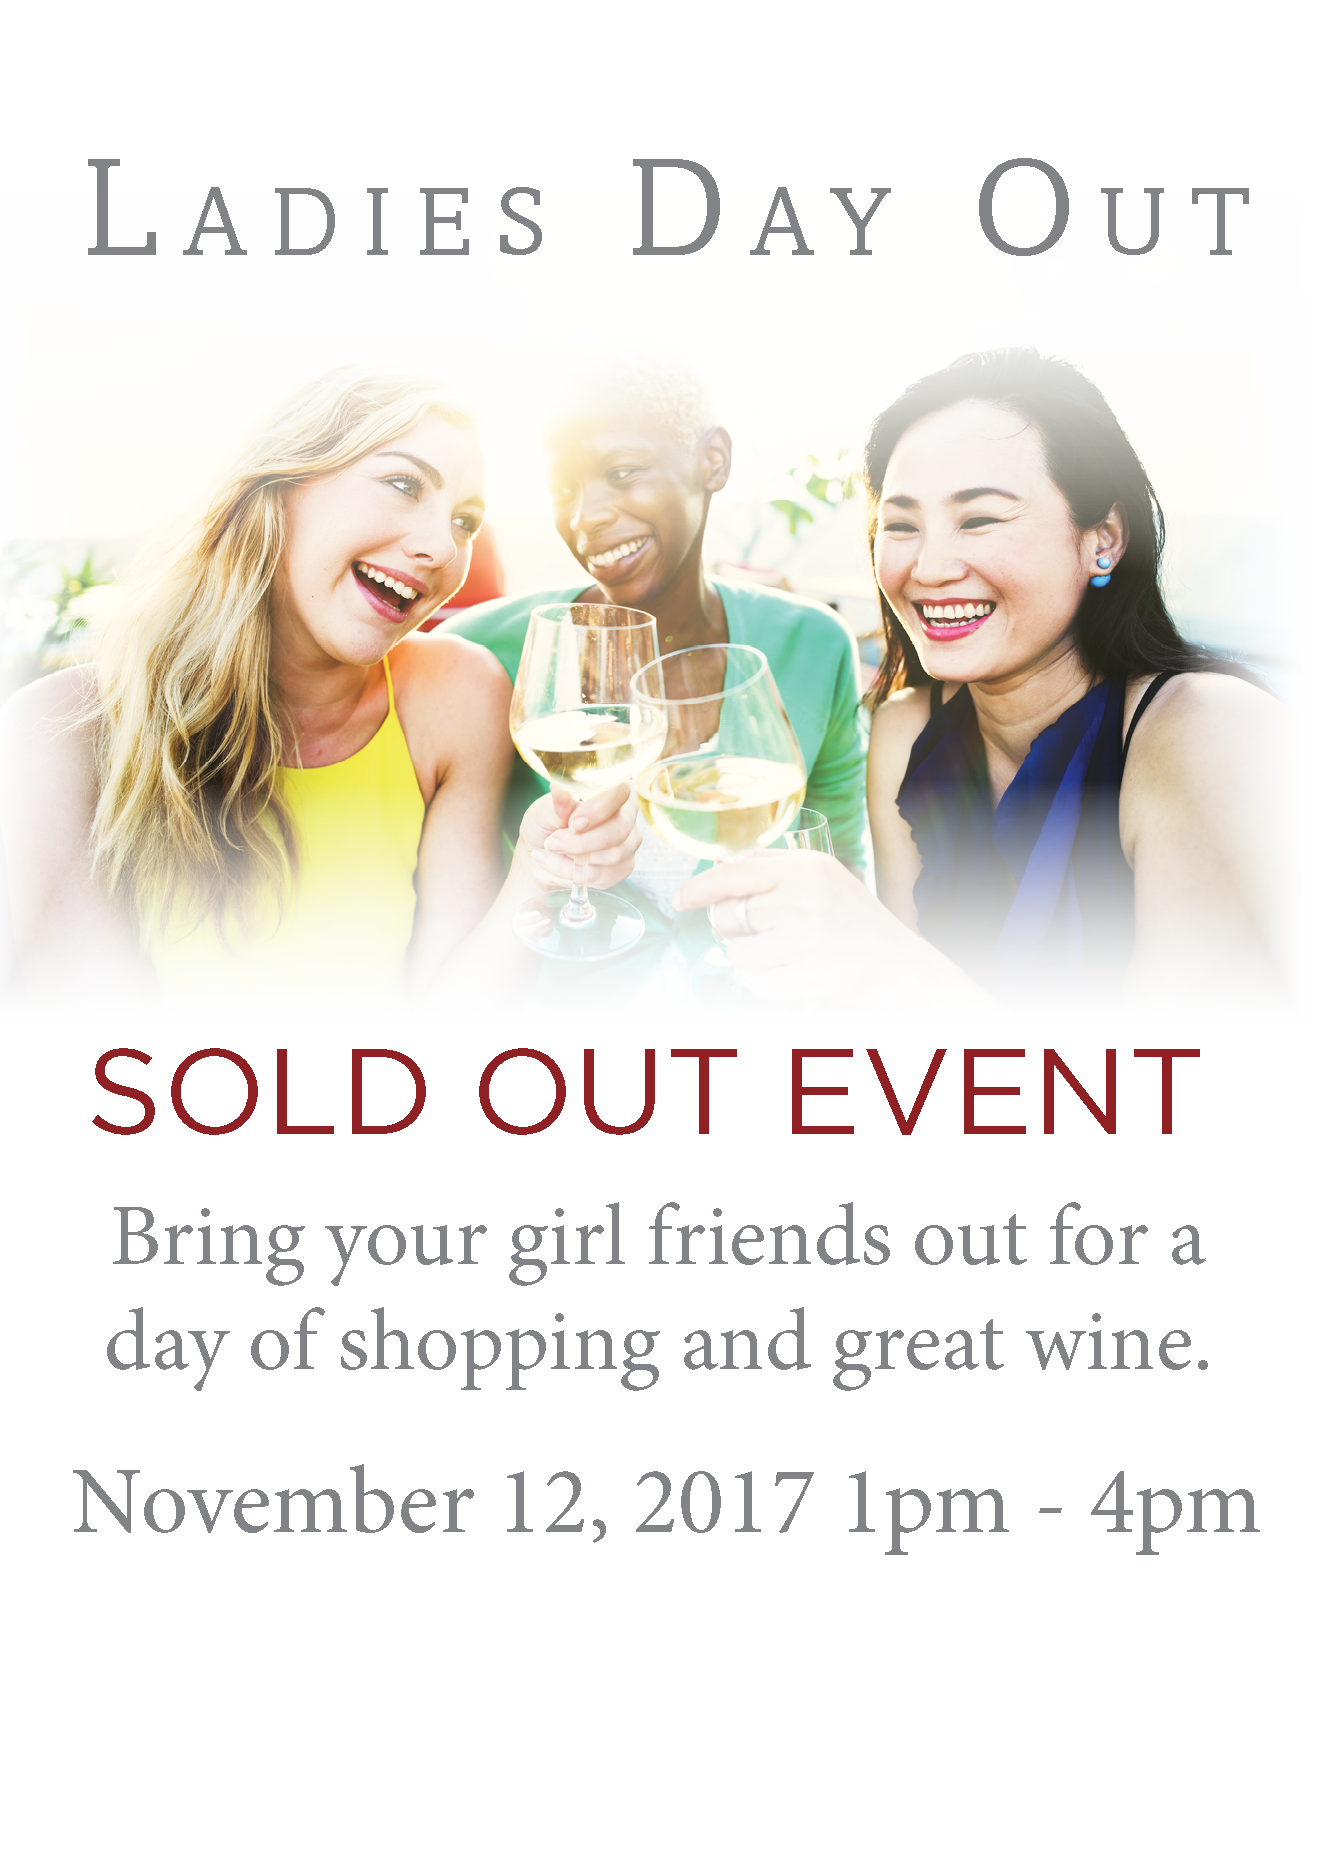 Ladies Day Out- Things to Do- Wine Tasting Frederick MD